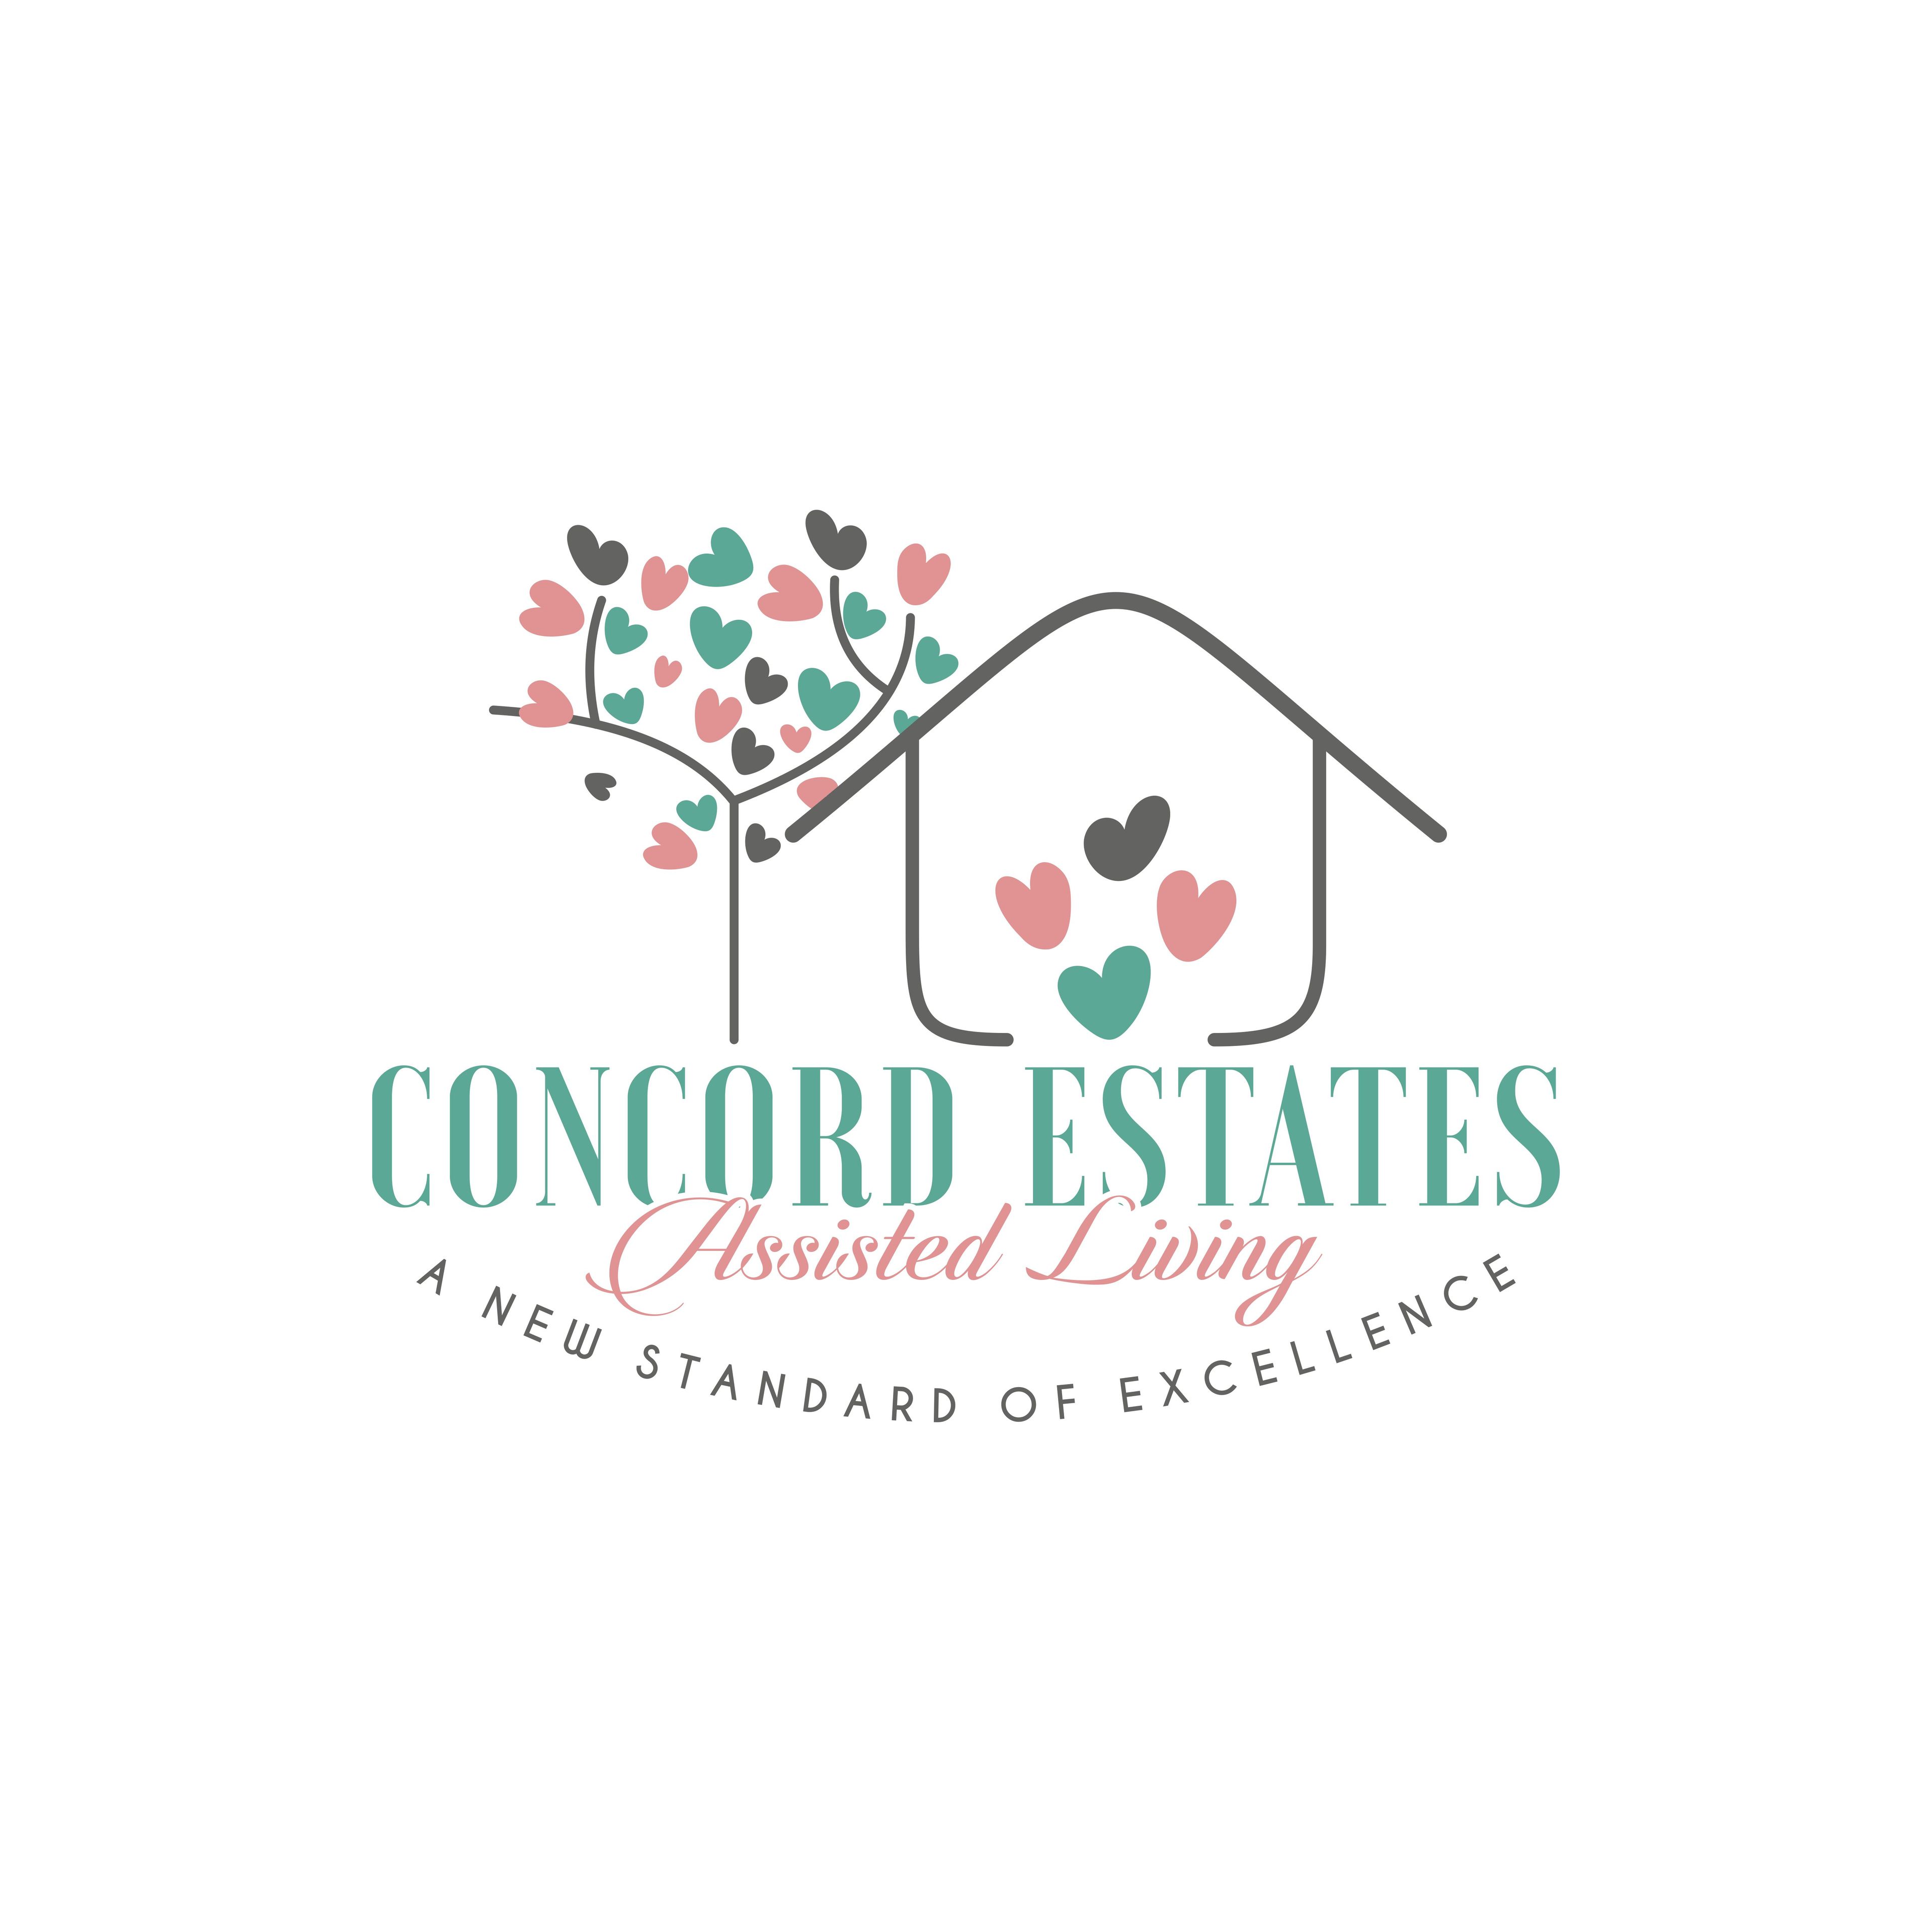 Concord Estates Assisted Living 2